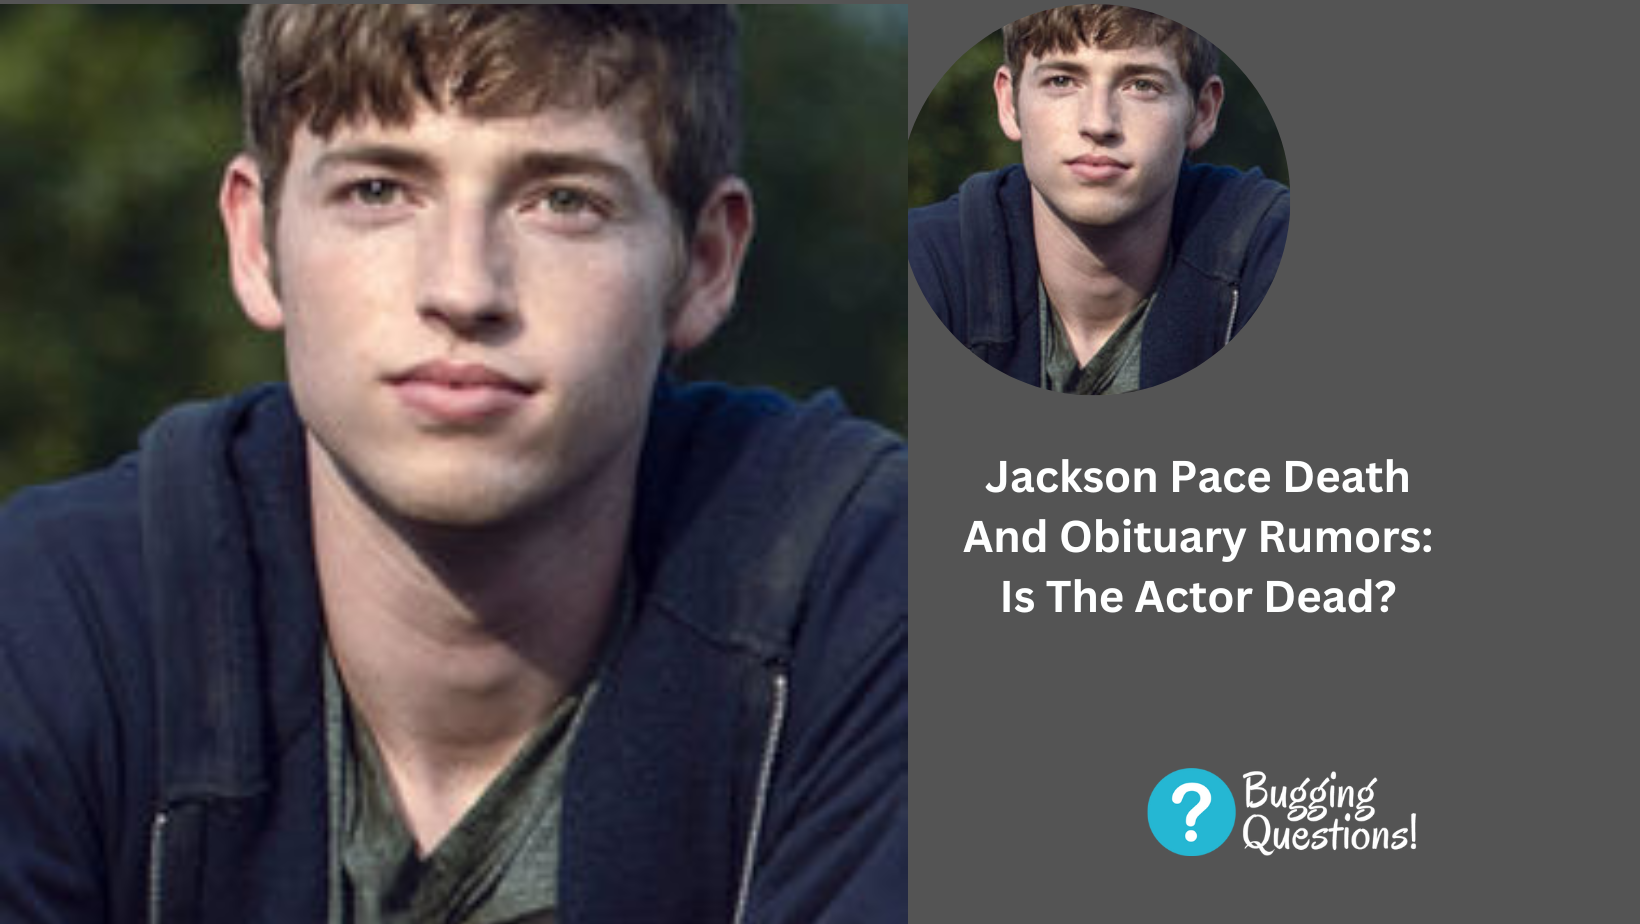 Jackson Pace Death And Obituary Rumors: Is The Actor Dead?